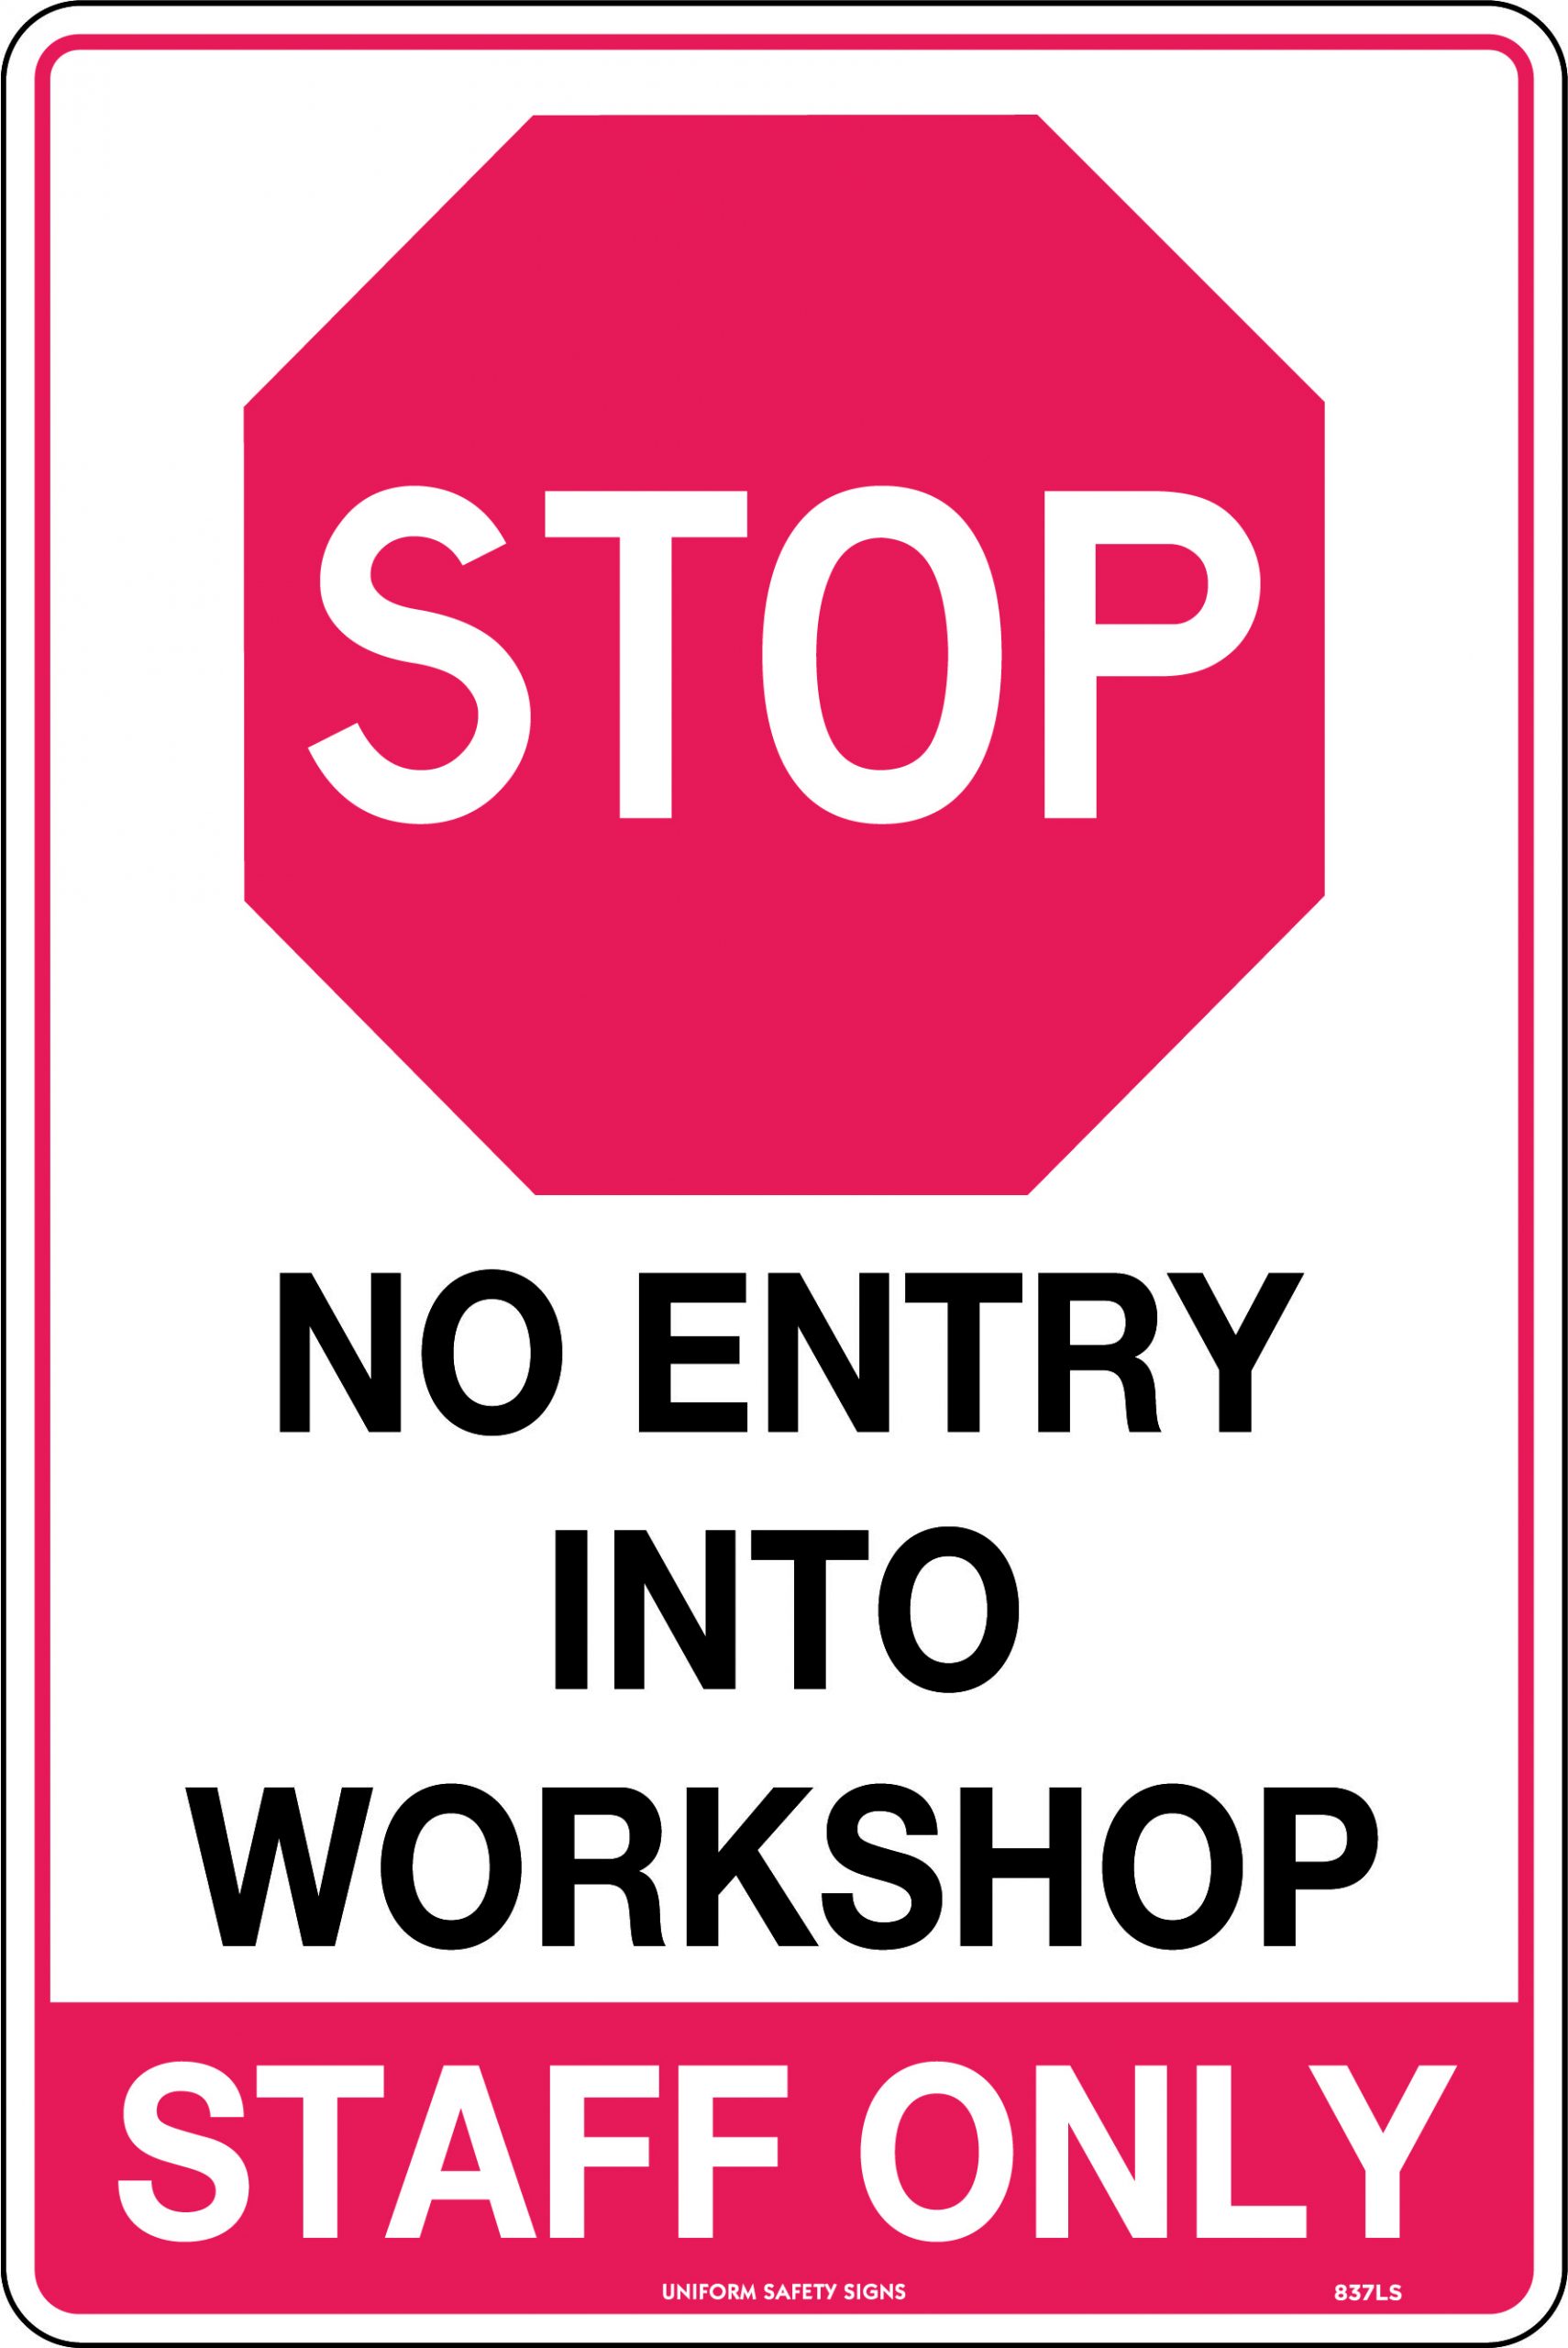 SIGN 300 X 225MM METAL STOP NO ENTRY INTO WORKSHOP STAFF ONLY